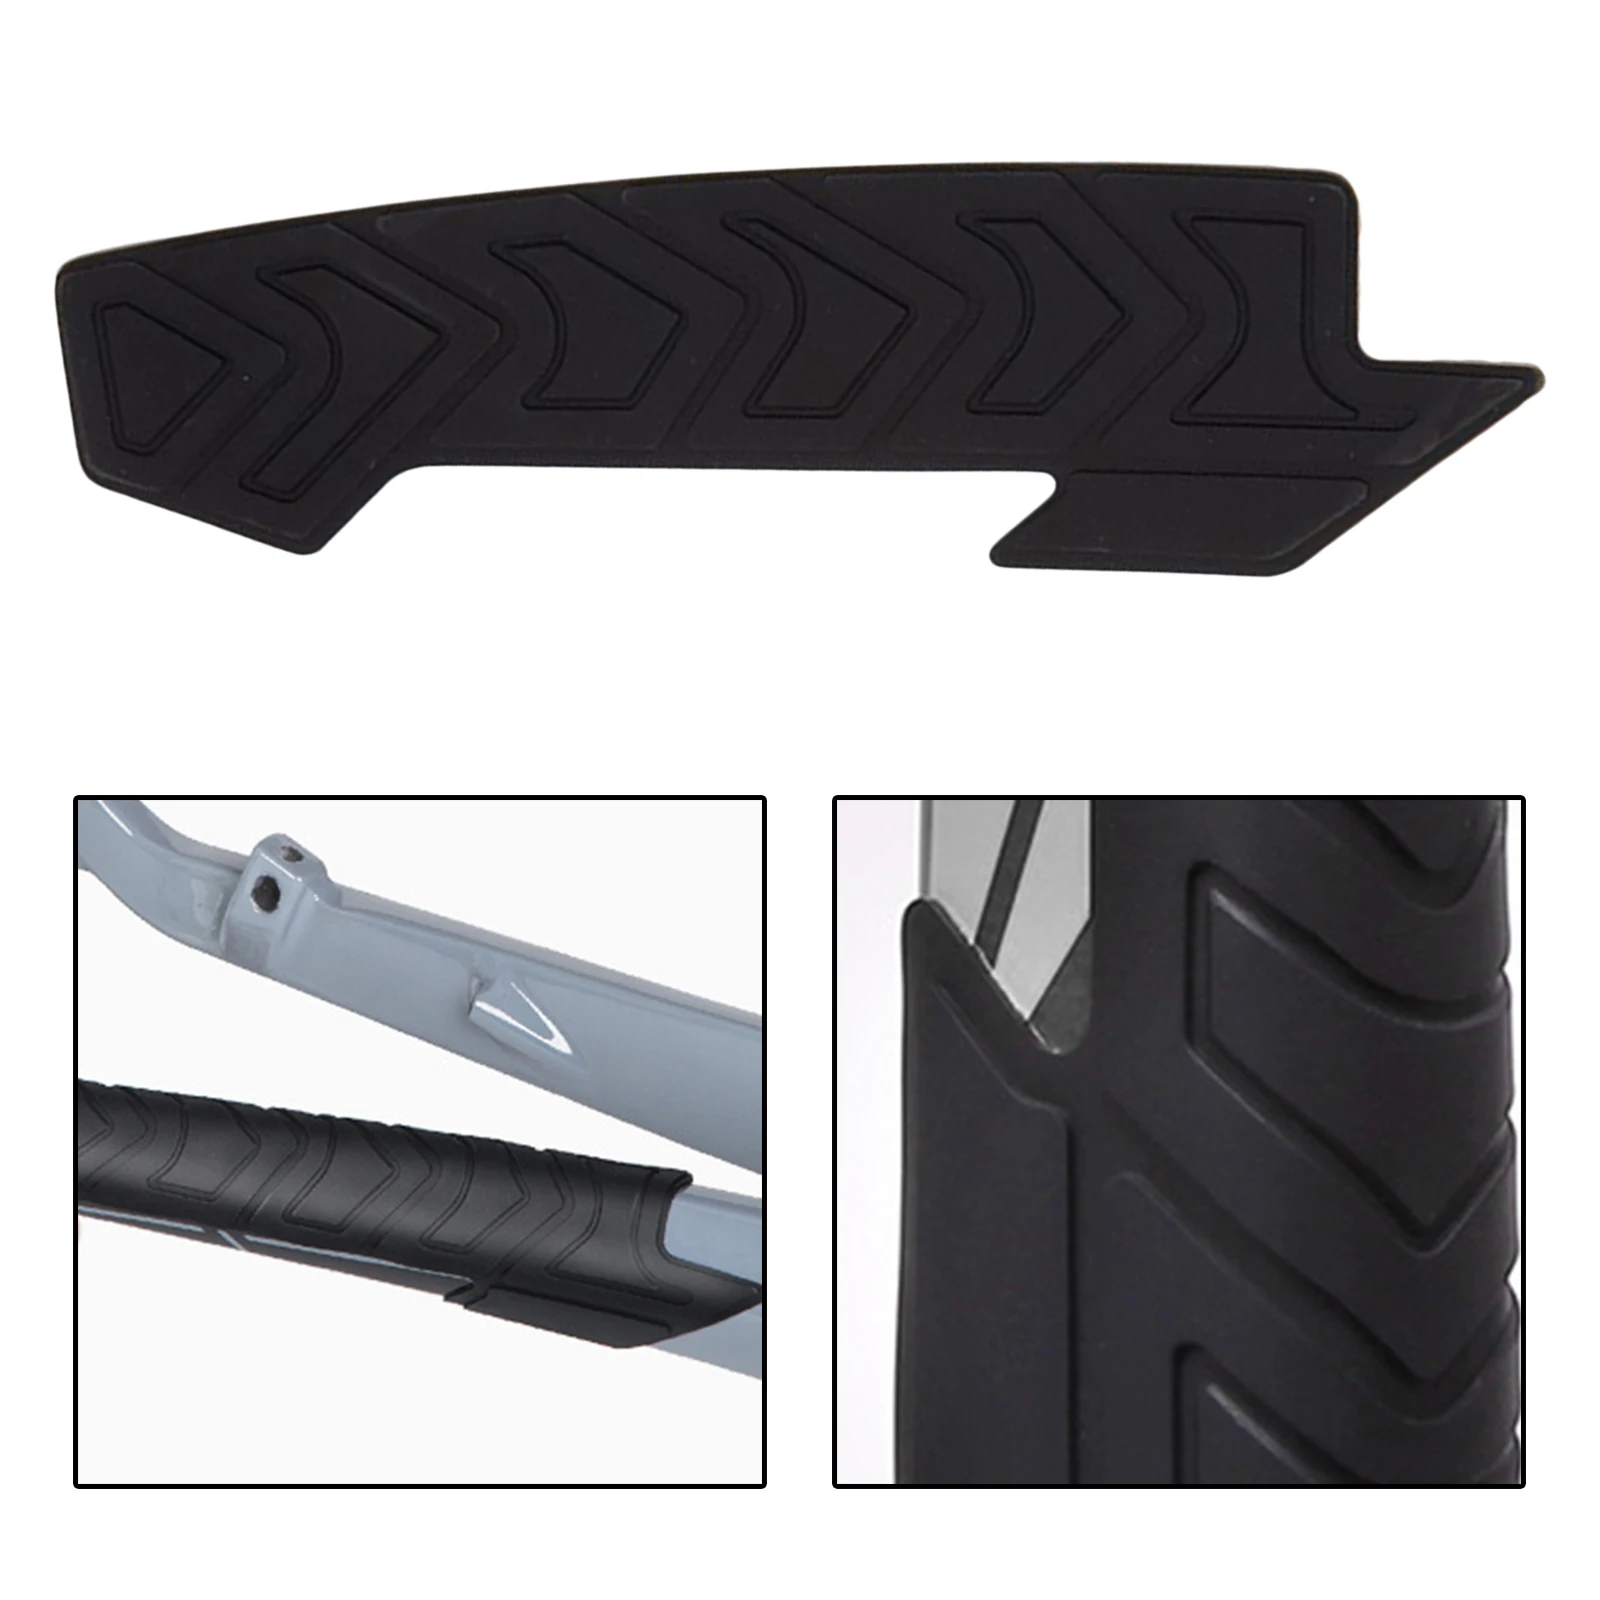 Premium Bike Chain Protector Frames Protect Tape Decals Anti-scratch Decorative Removable Bike Accs